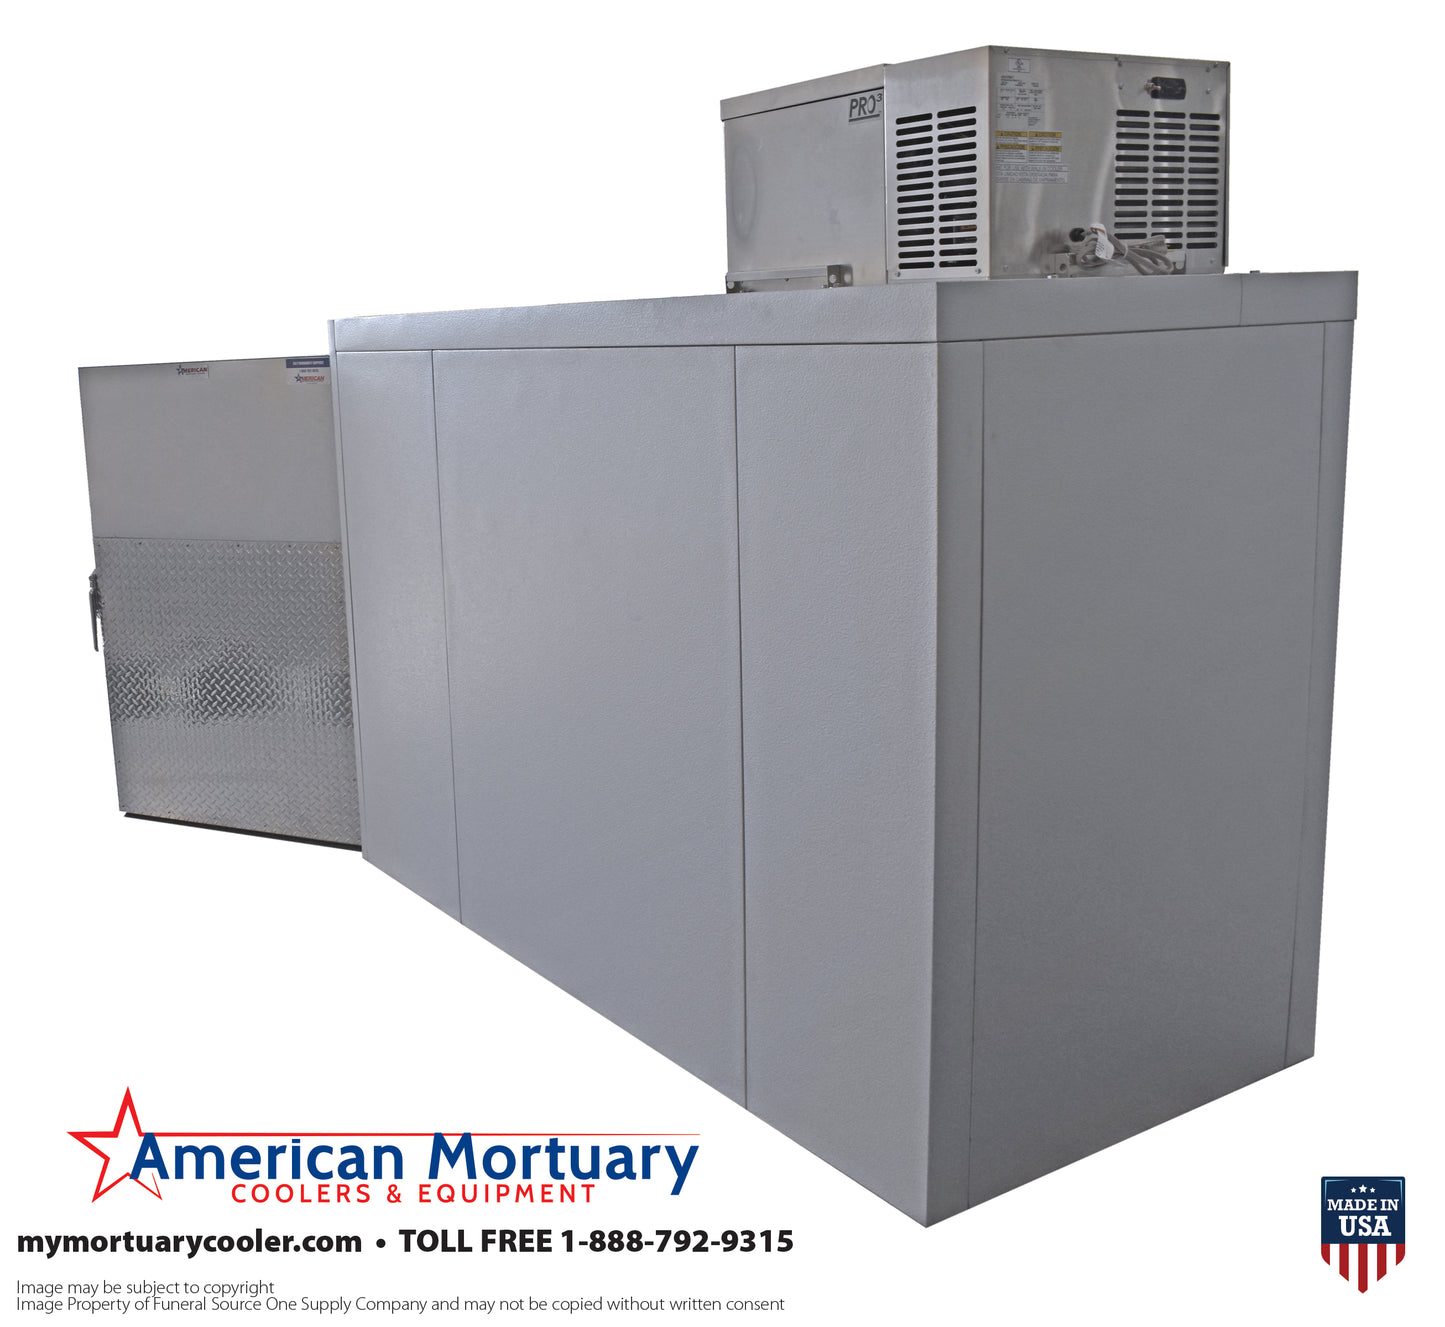 Oversized 2 Body Cot Roll-In Mortuary Cooler AMC Model #2BRX